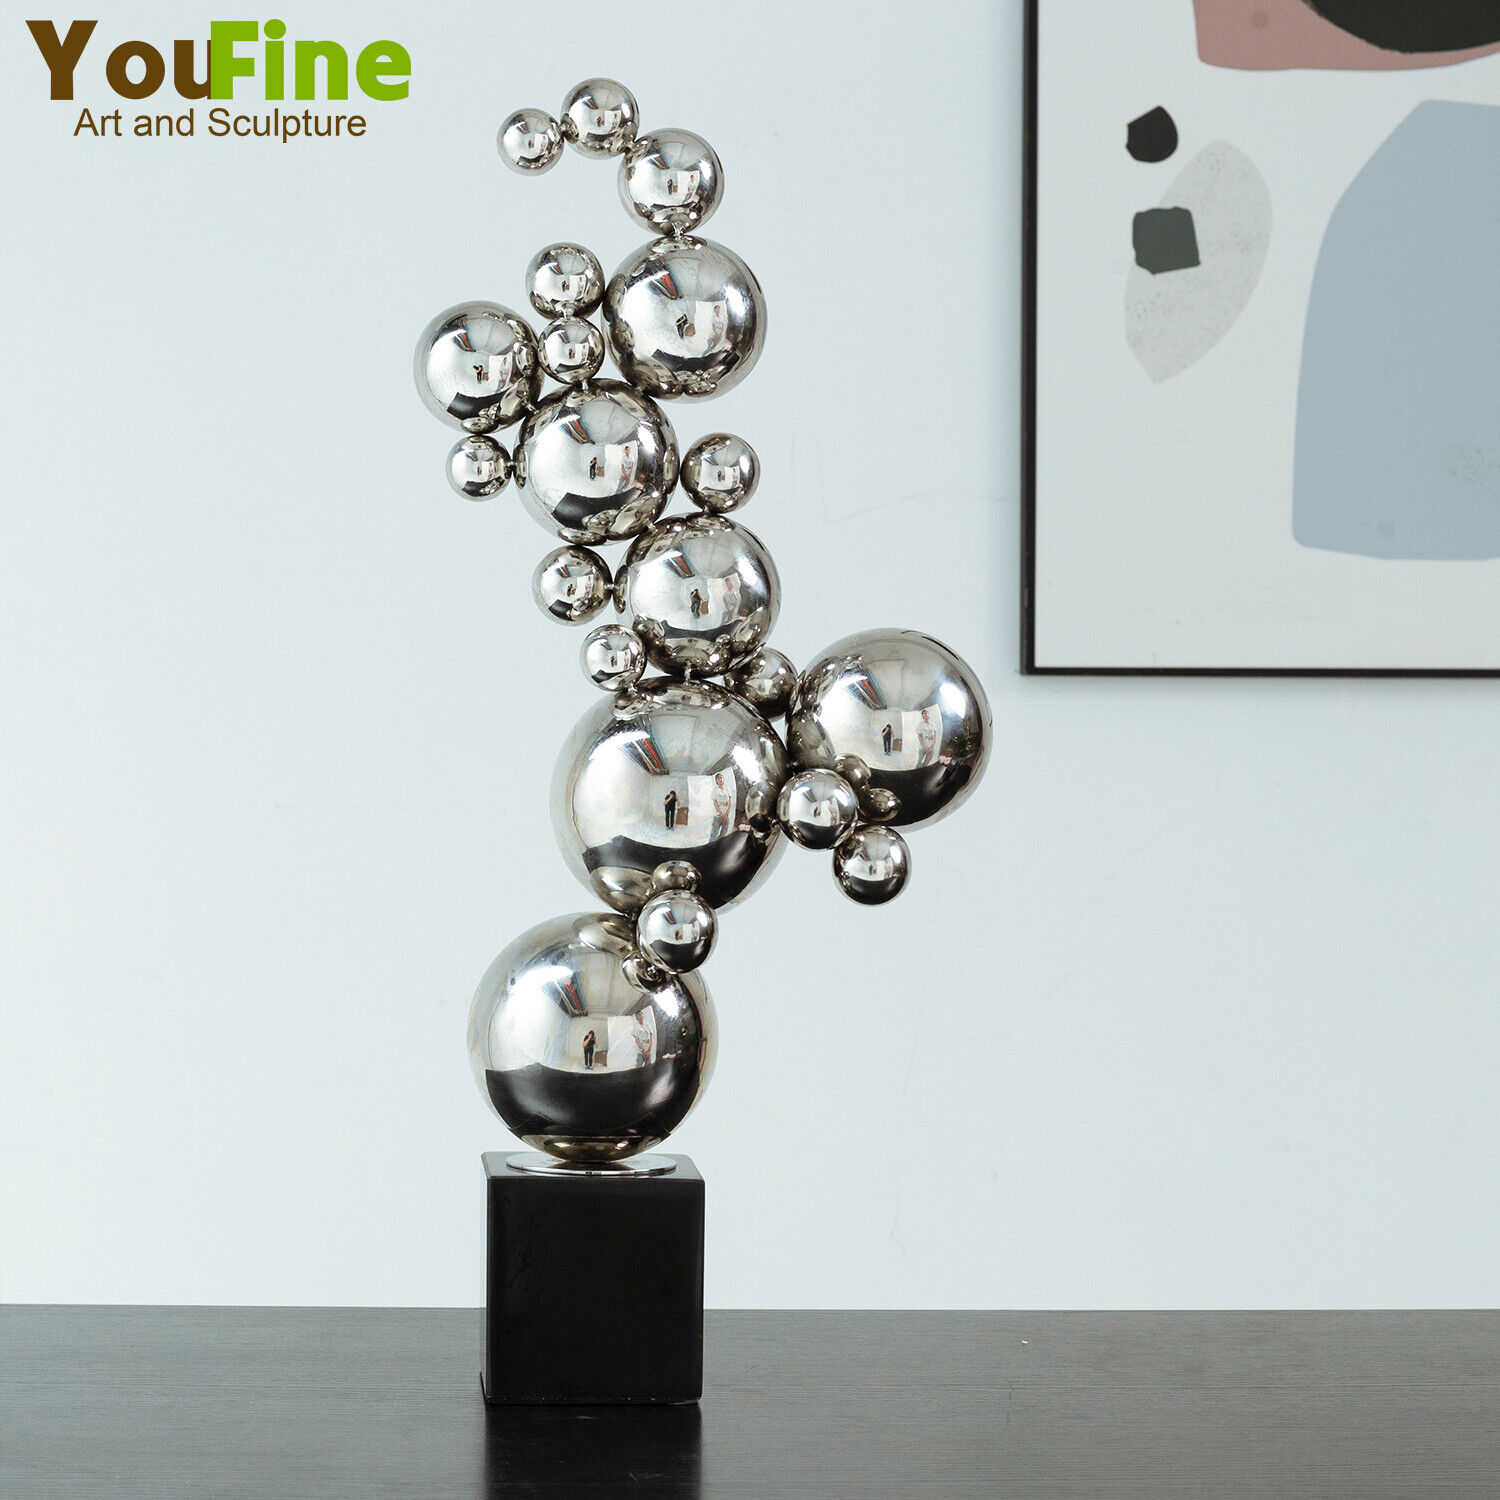 61cm Abstract Metal Ball Sculpture Stainless Steel Metal Statue Home Hotel Decor